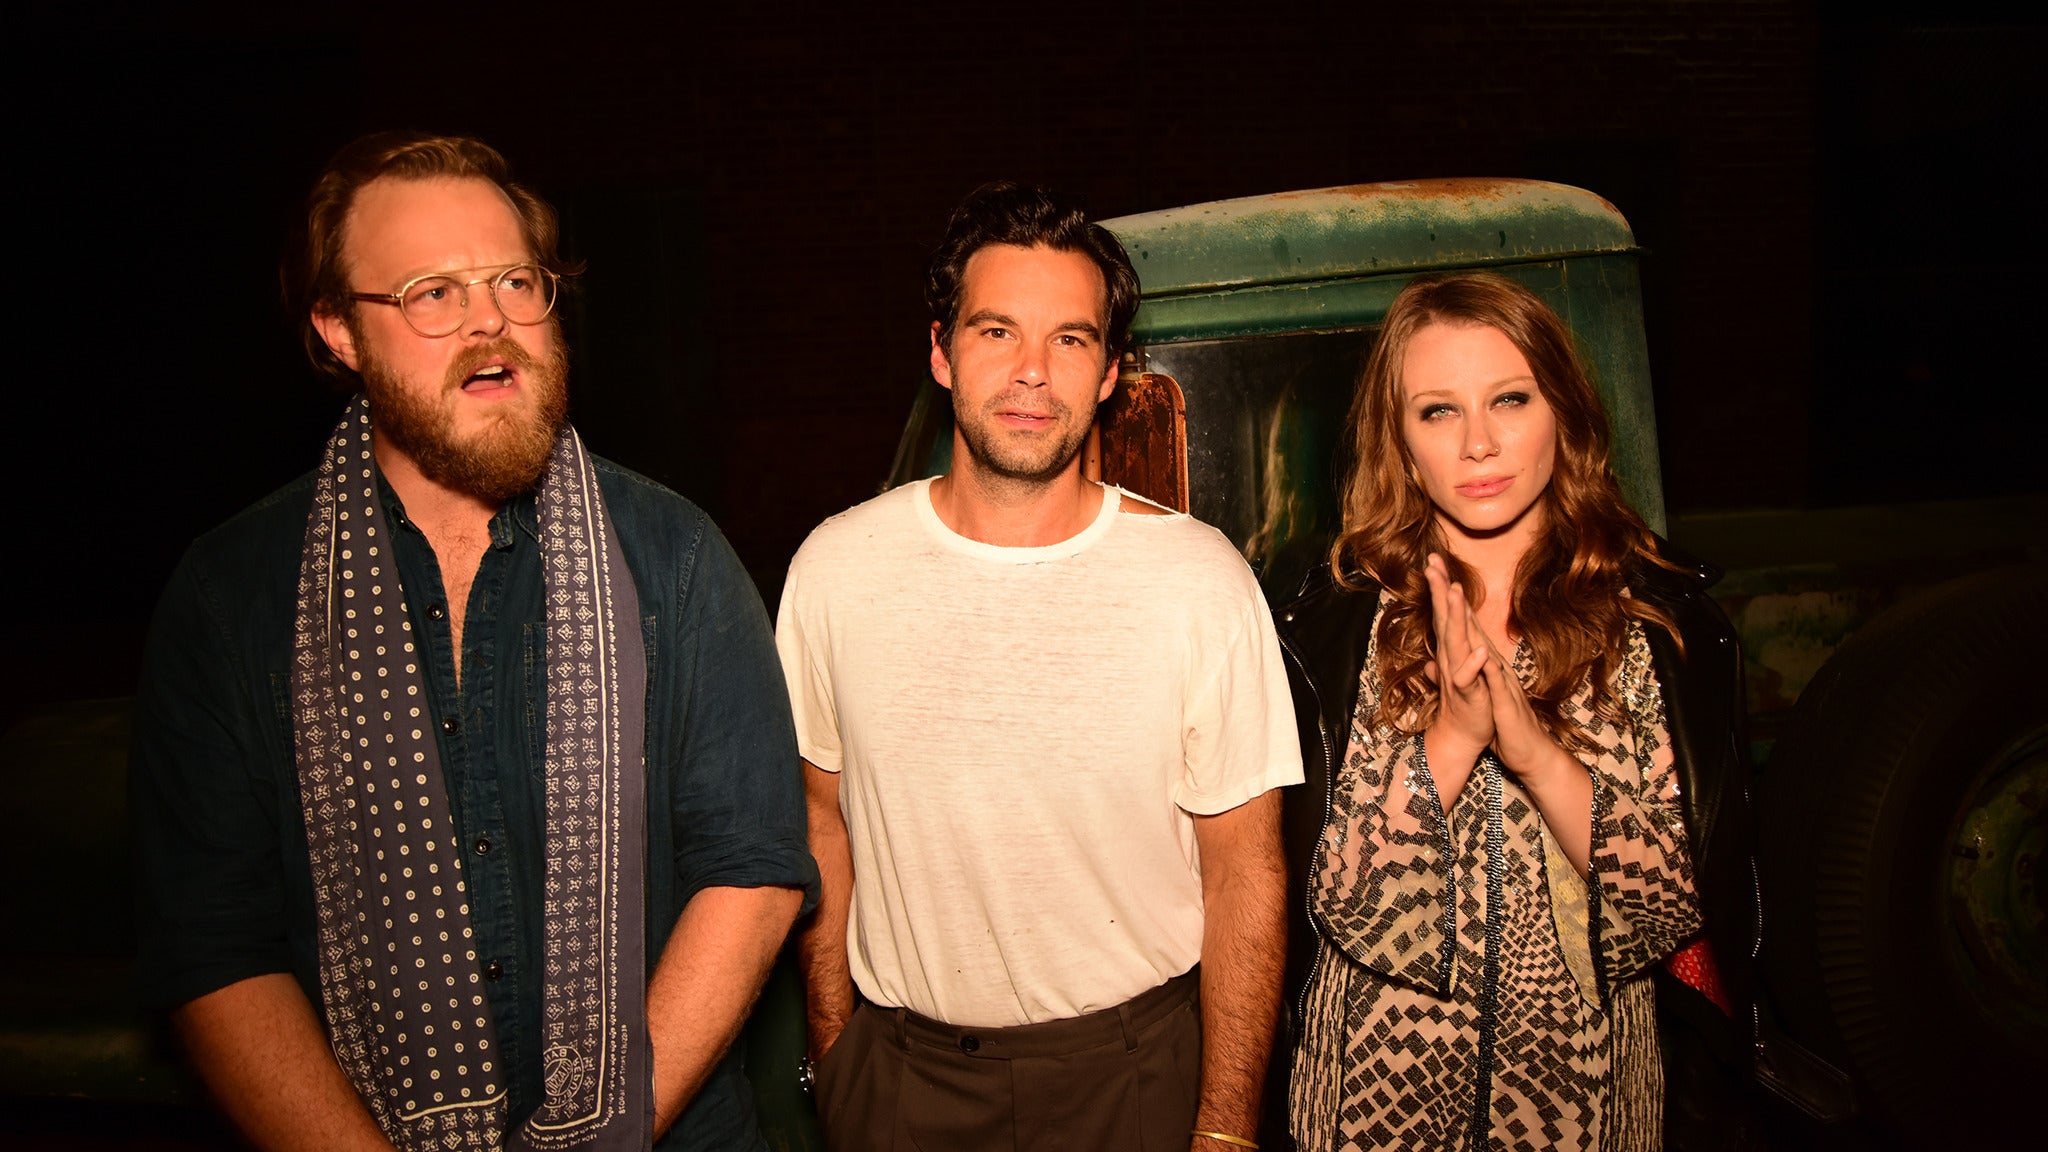 The Lone Bellow: Half Moon Light Tour in Boston promo photo for Spotify presale offer code